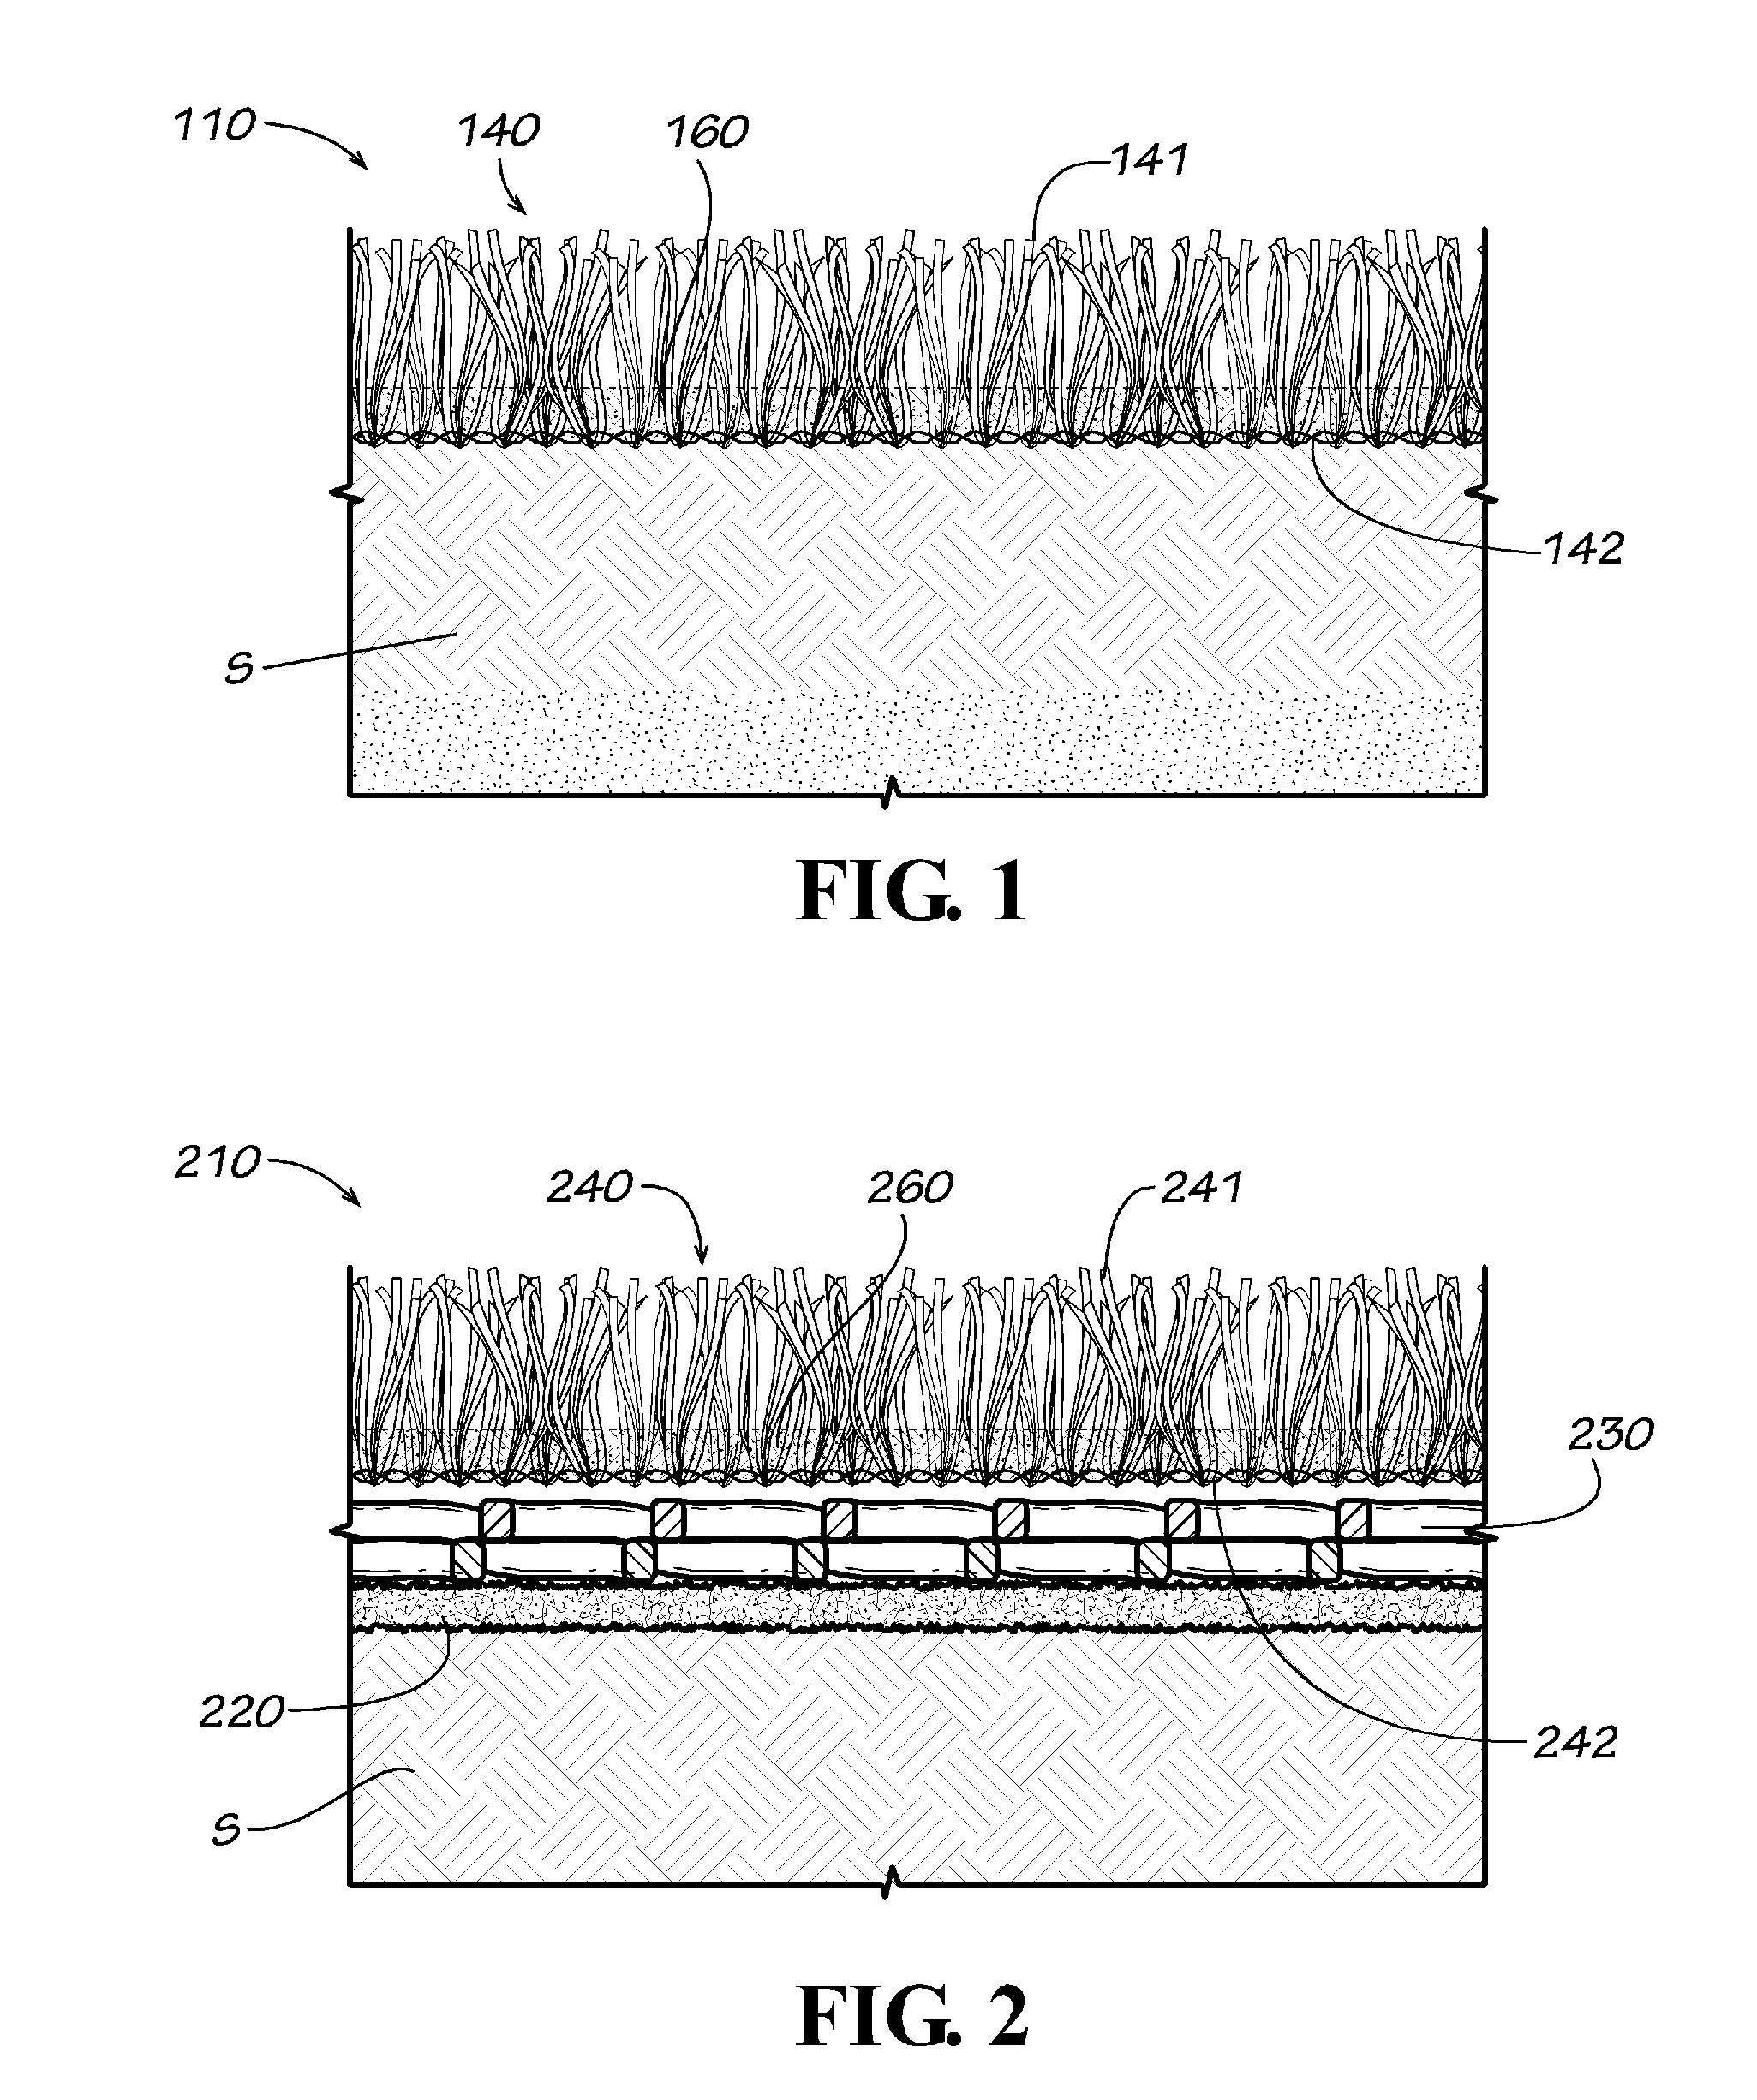 Synthetic ground cover system with binding infill for erosion control